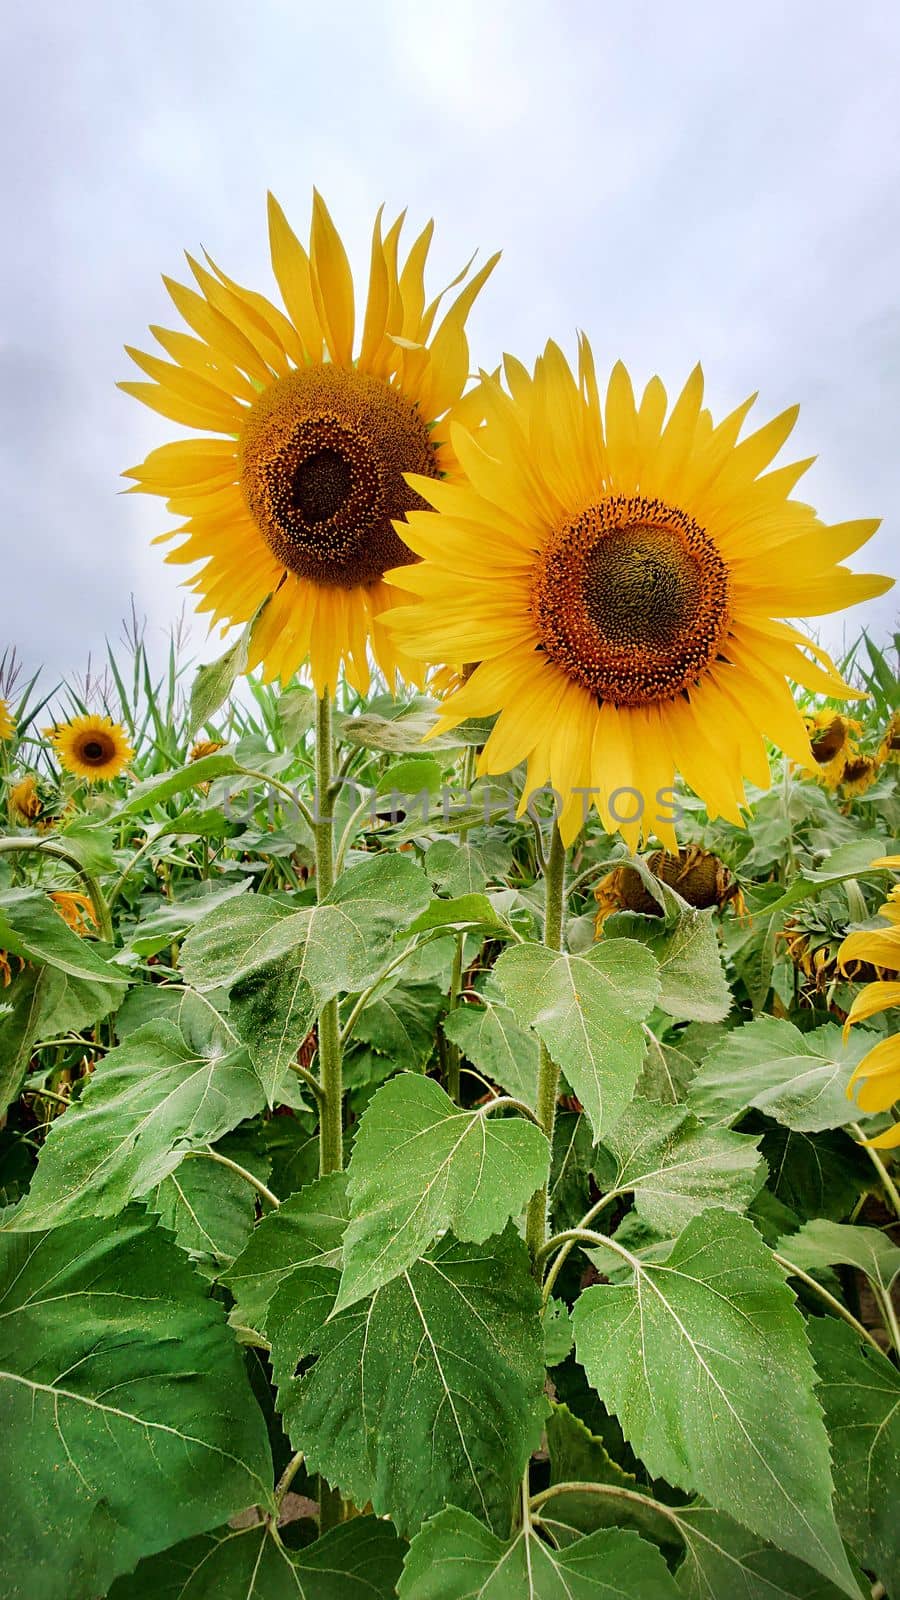 Two bright yellow tall sunflowers on a cloudy day by Mastak80